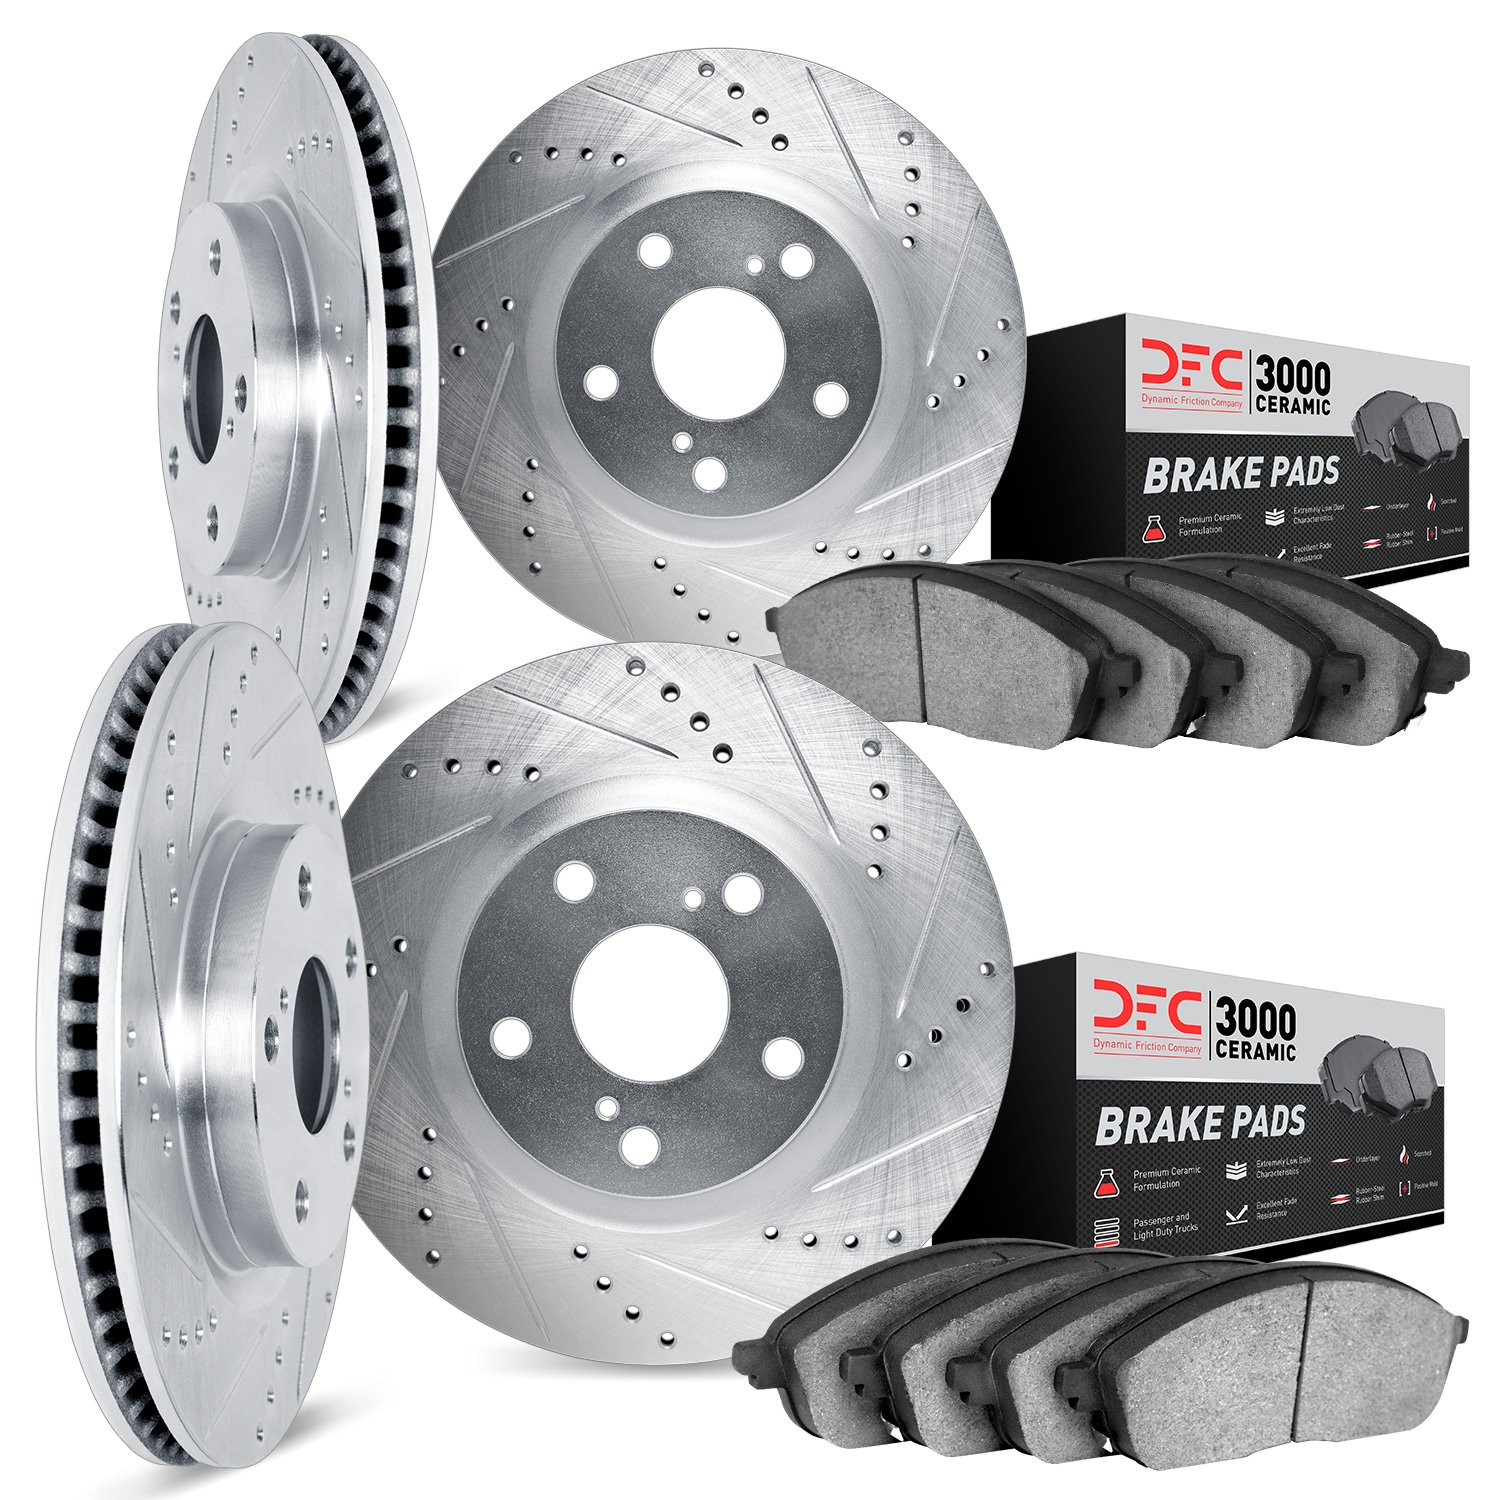 7304-54056 Drilled/Slotted Brake Rotor with 3000-Series Ceramic Brake Pads Kit [Silver], 2010-2011 Ford/Lincoln/Mercury/Mazda, P